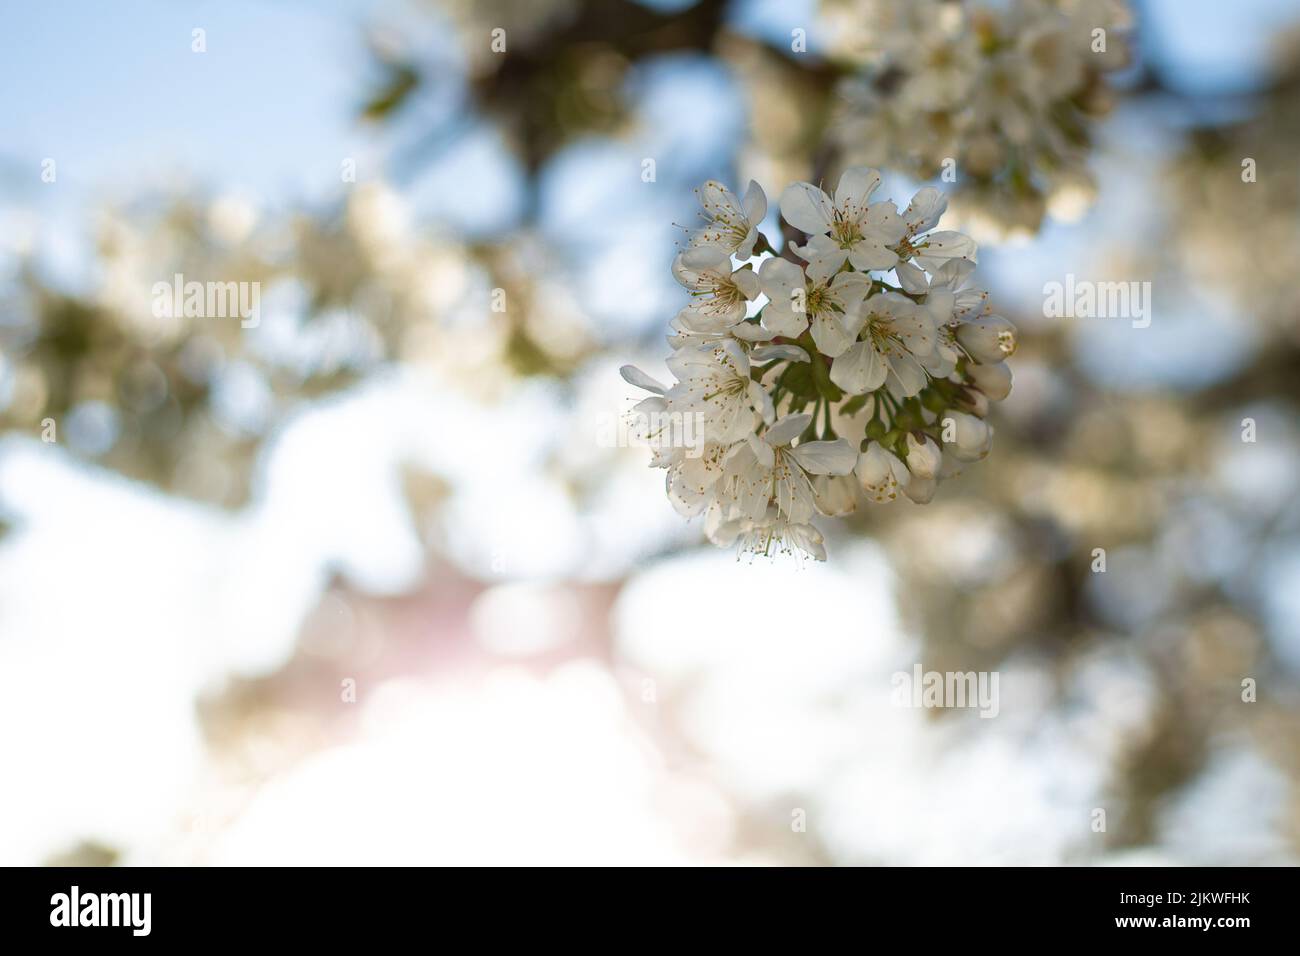 A macro view of white Prunus cerasus flowers blooming on the tree branches against the blurry background Stock Photo